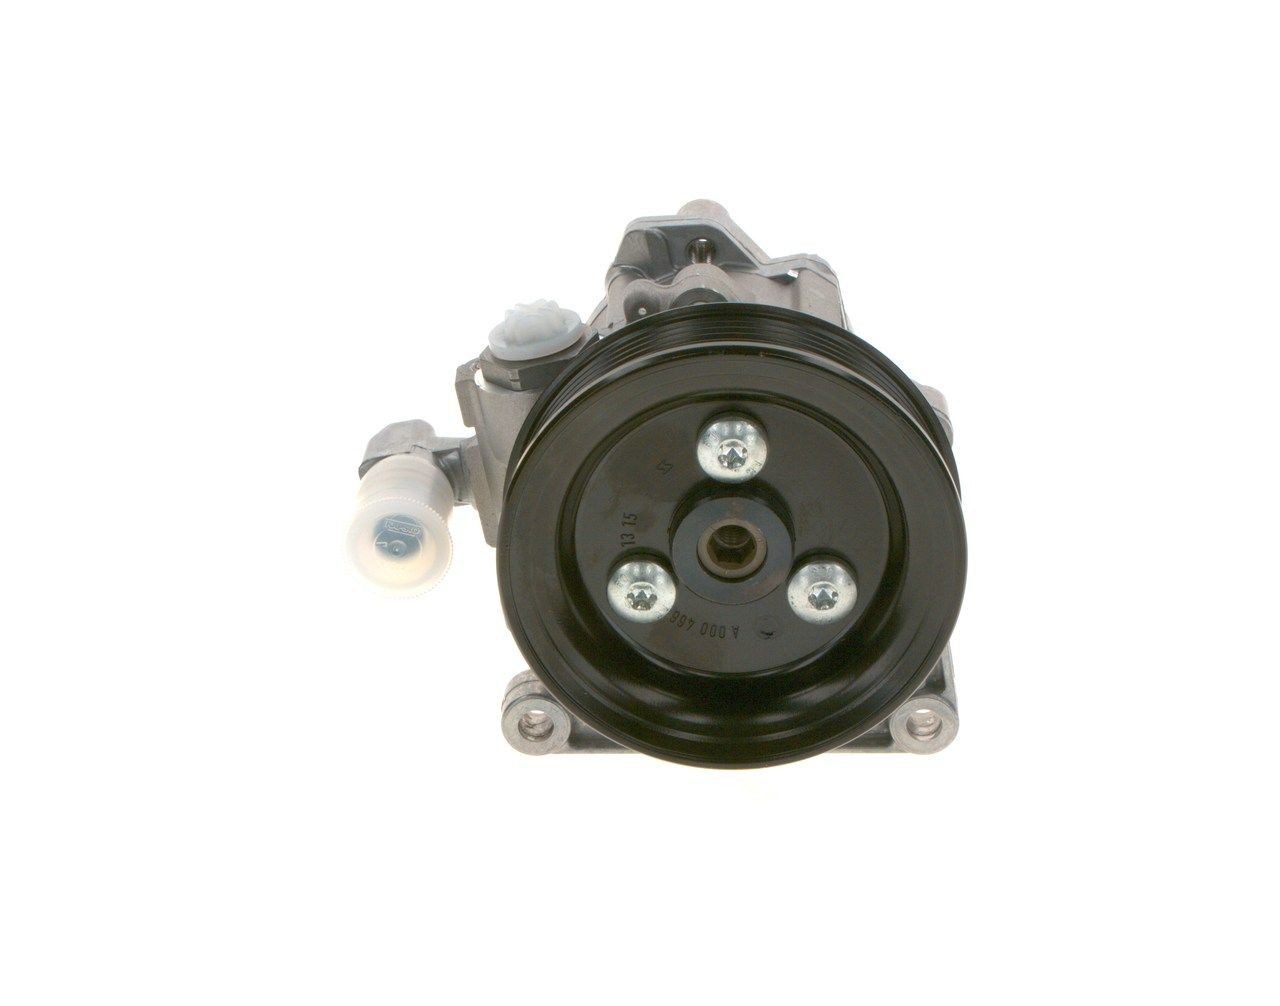 BOSCH Hydraulic steering pump K S01 000 602 suitable for ML W163